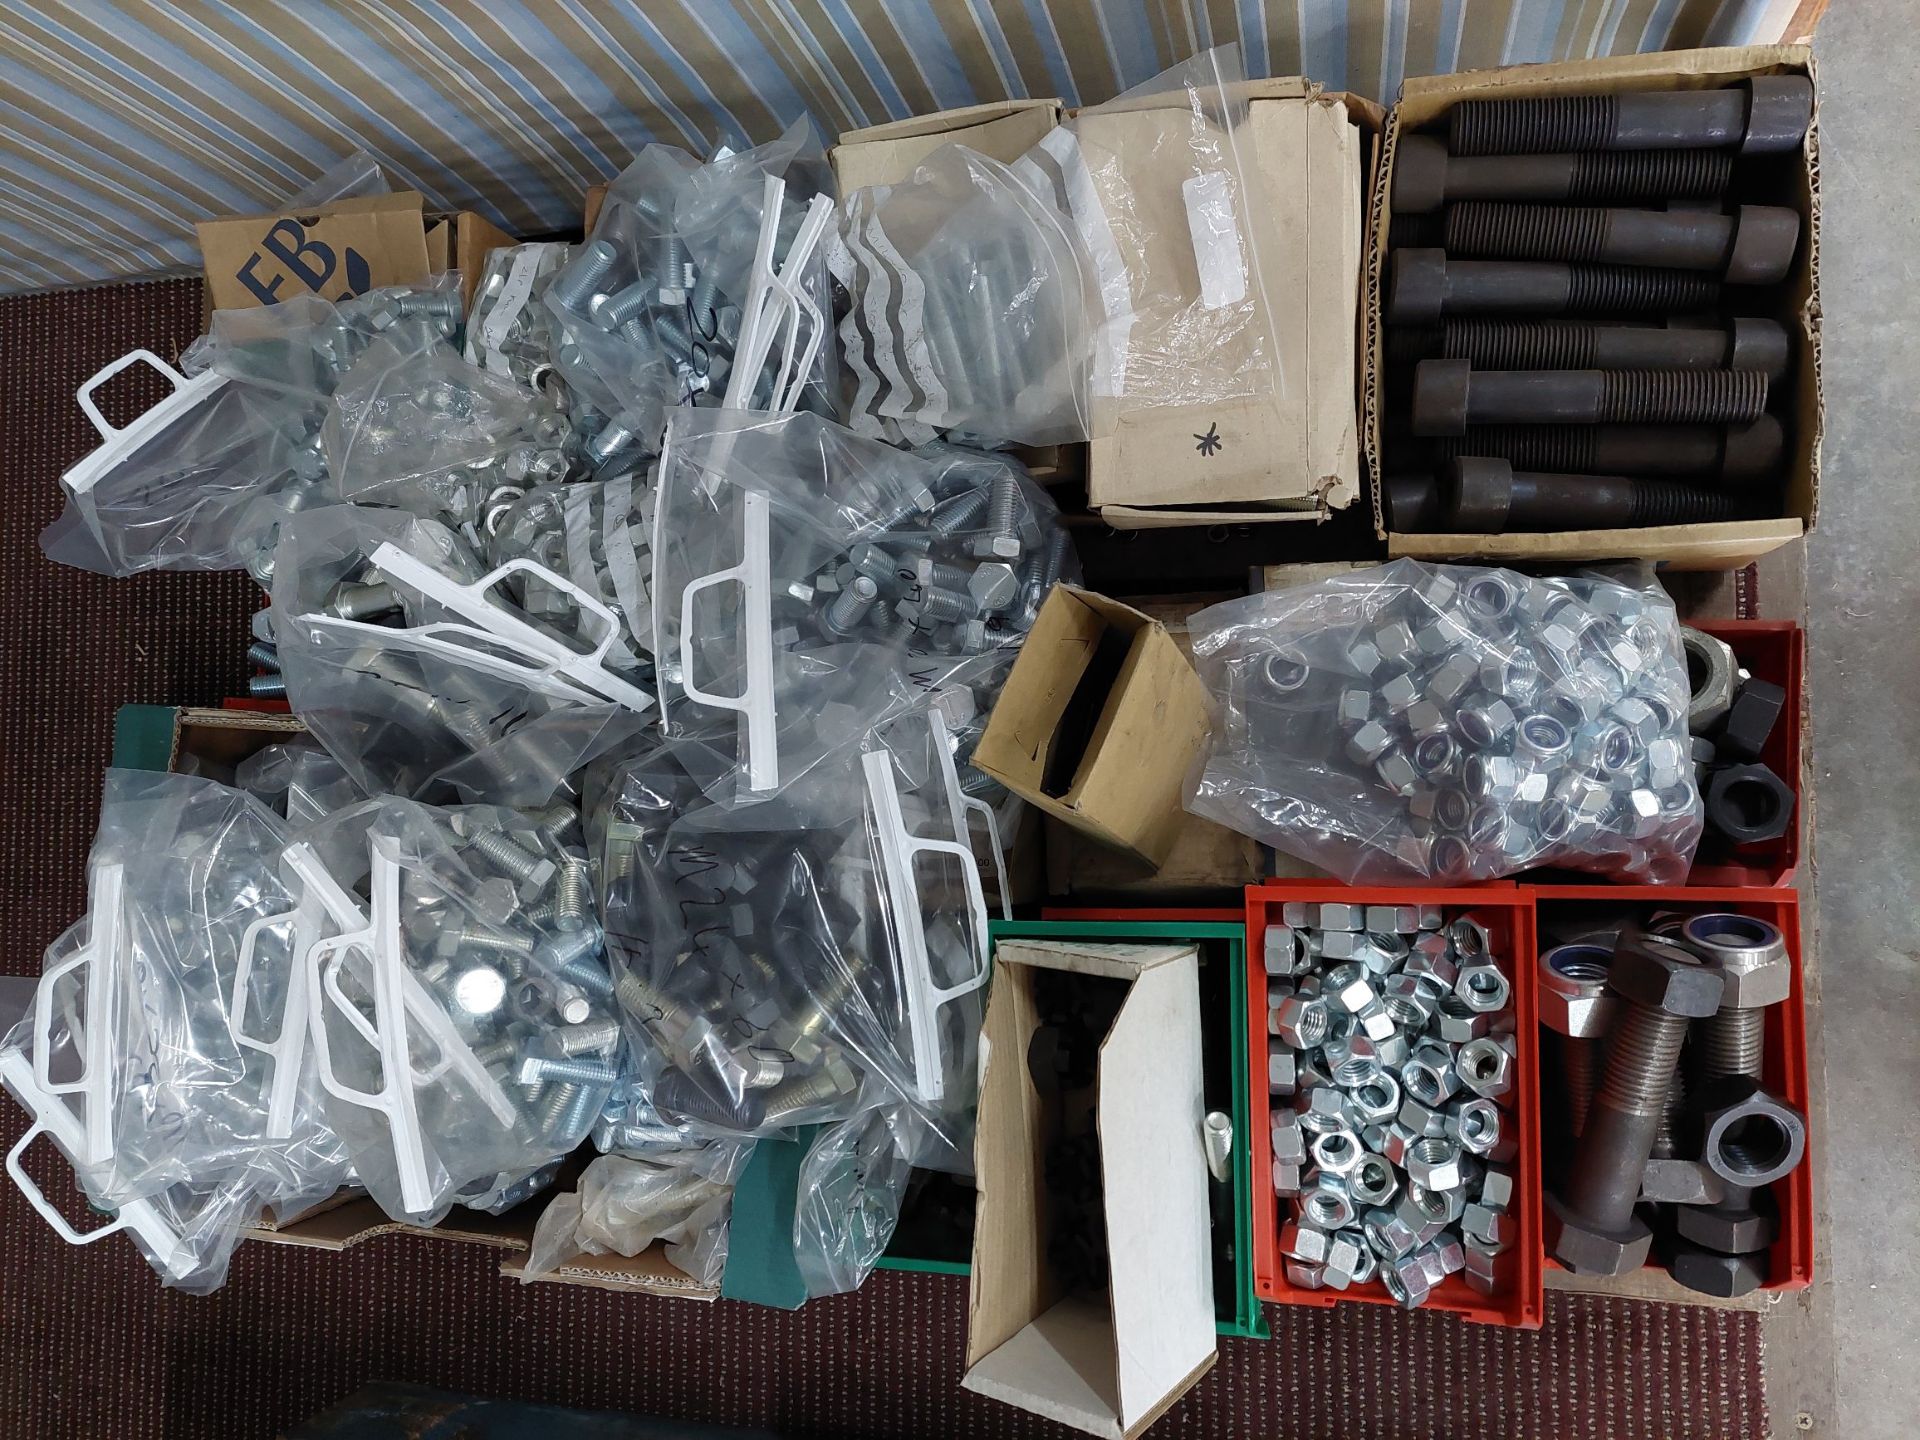 Pallet of misc large nuts and bolts. NO VAT.